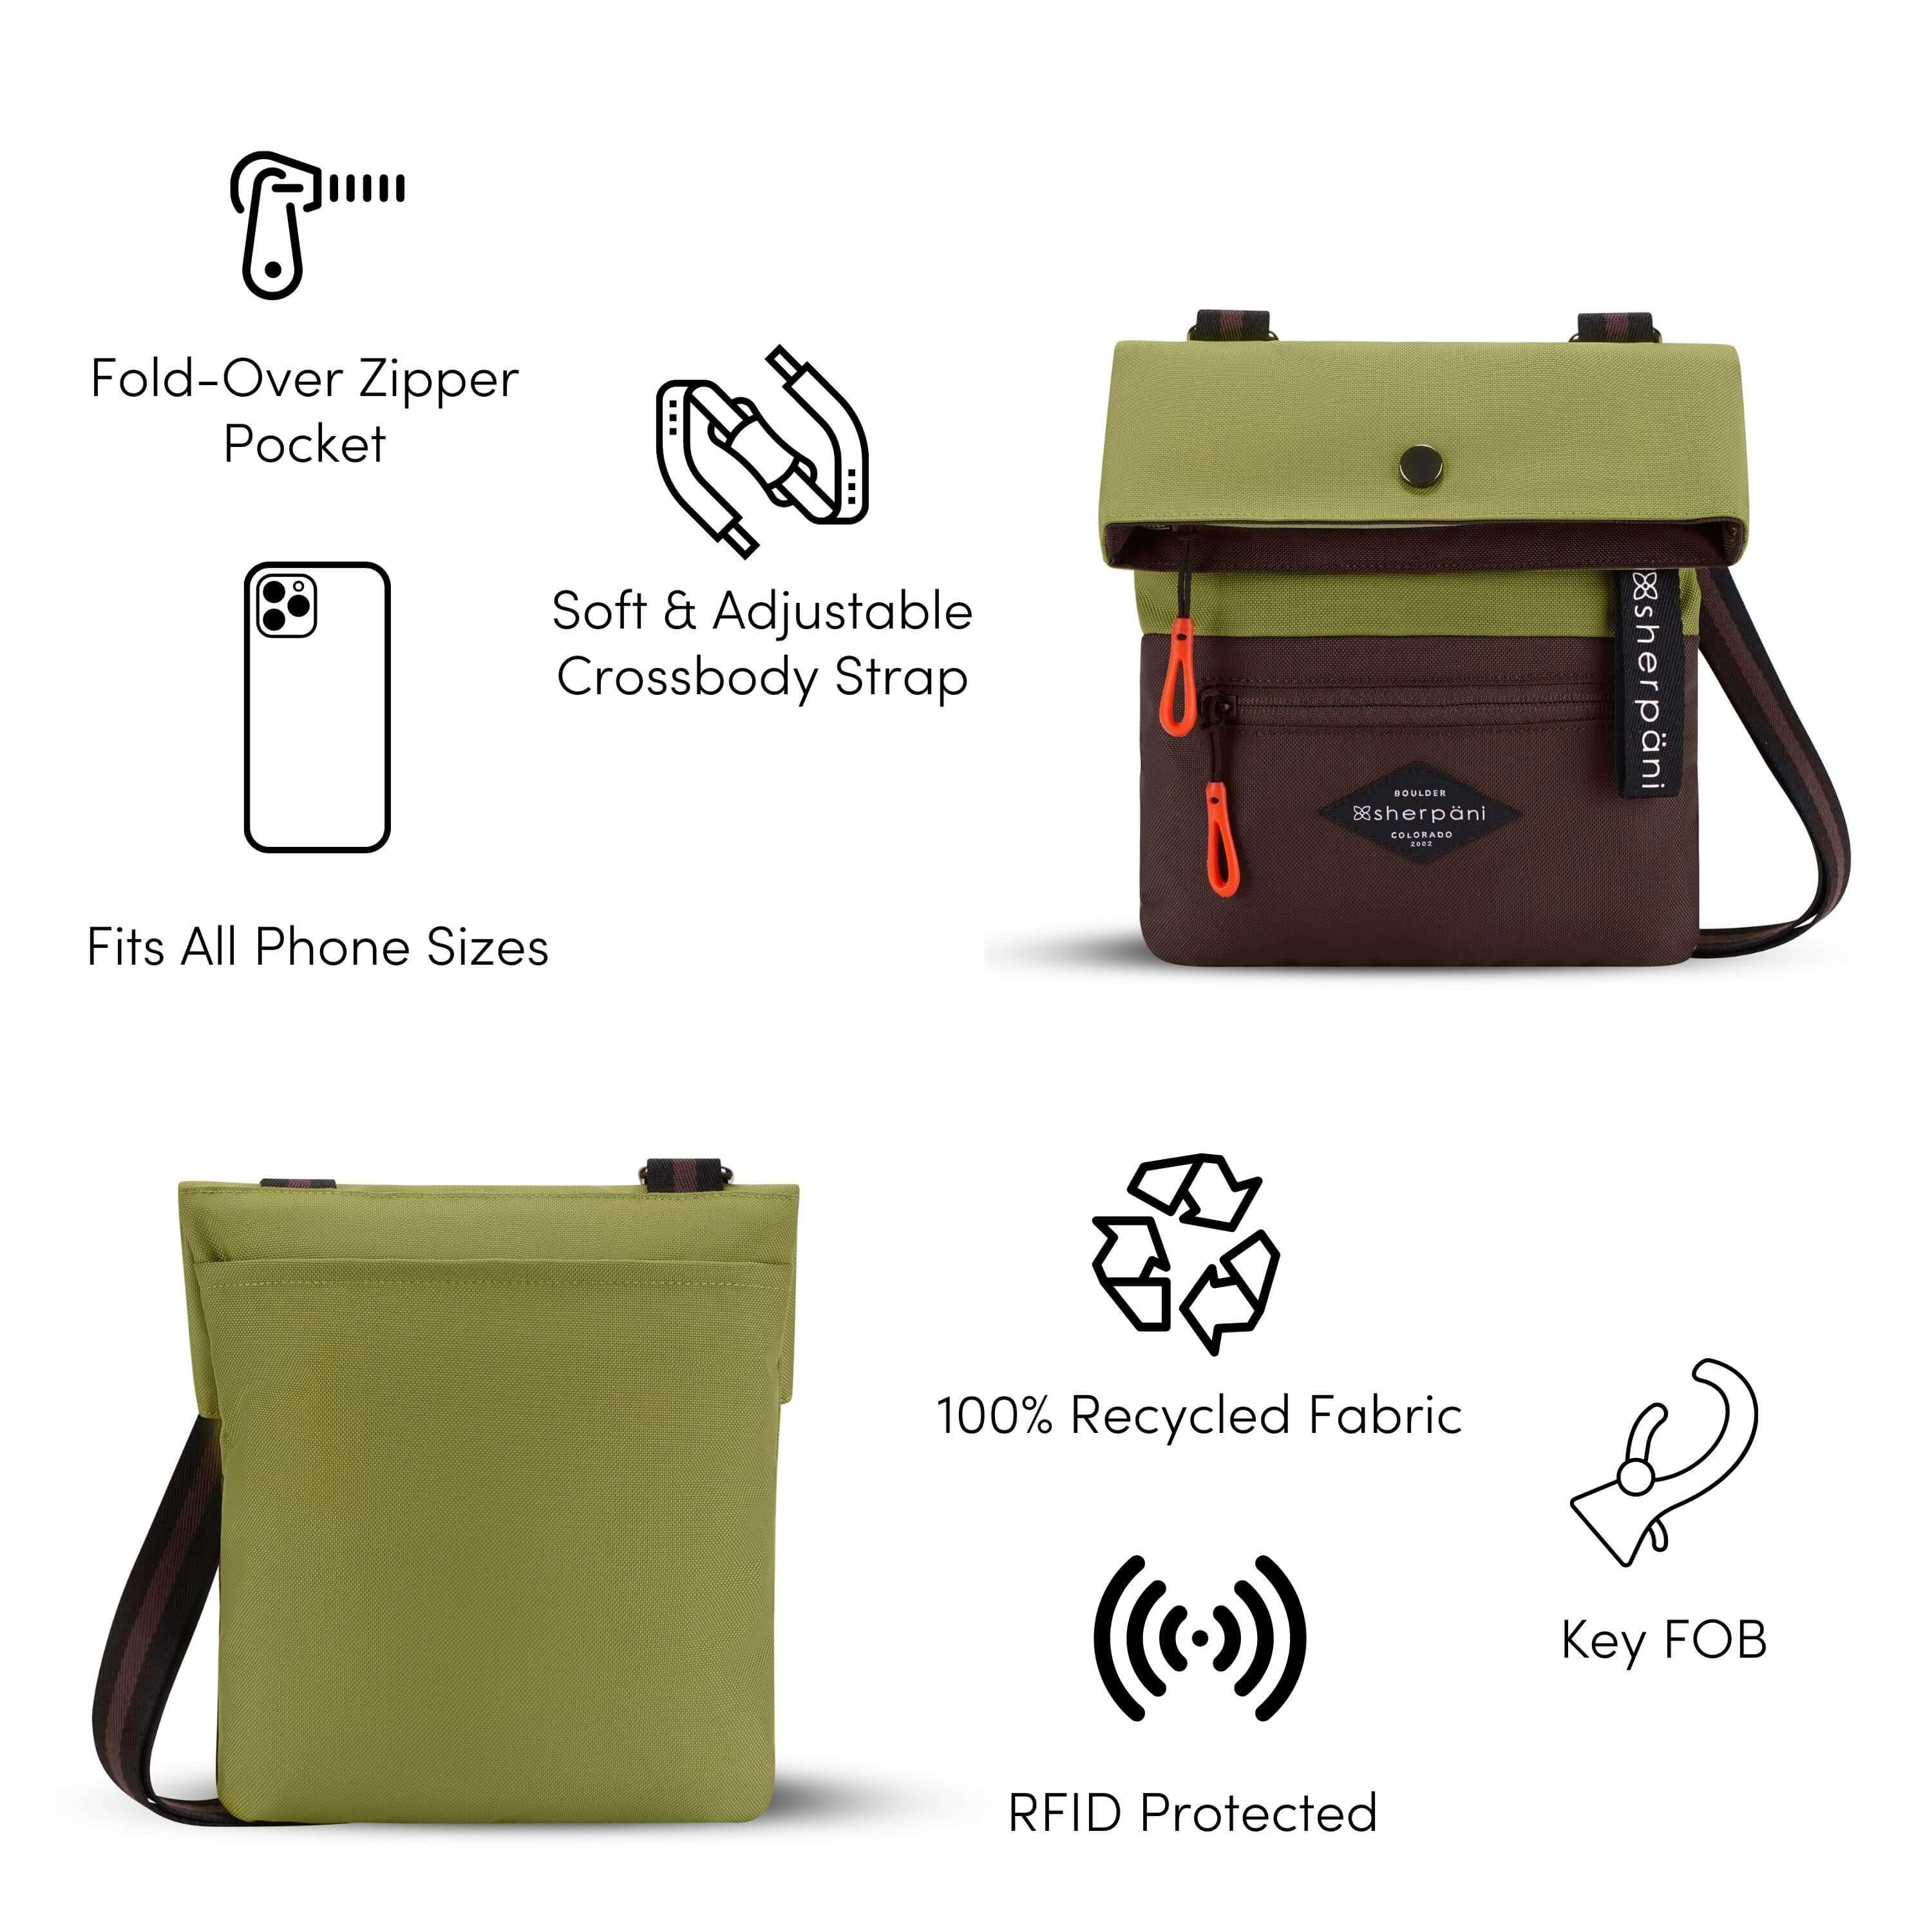 A Graphic showing the features of Sherpani’s crossbody, the Pica. There is a front and back view of the bag. The following features are highlighted with corresponding graphics: Fold-Over Zipper Pocket, Soft & Adjustable Crossbody Strap, Fits All Phone Sizes, 100% Recycled Fabric, RFID Protected, Key FOB. 